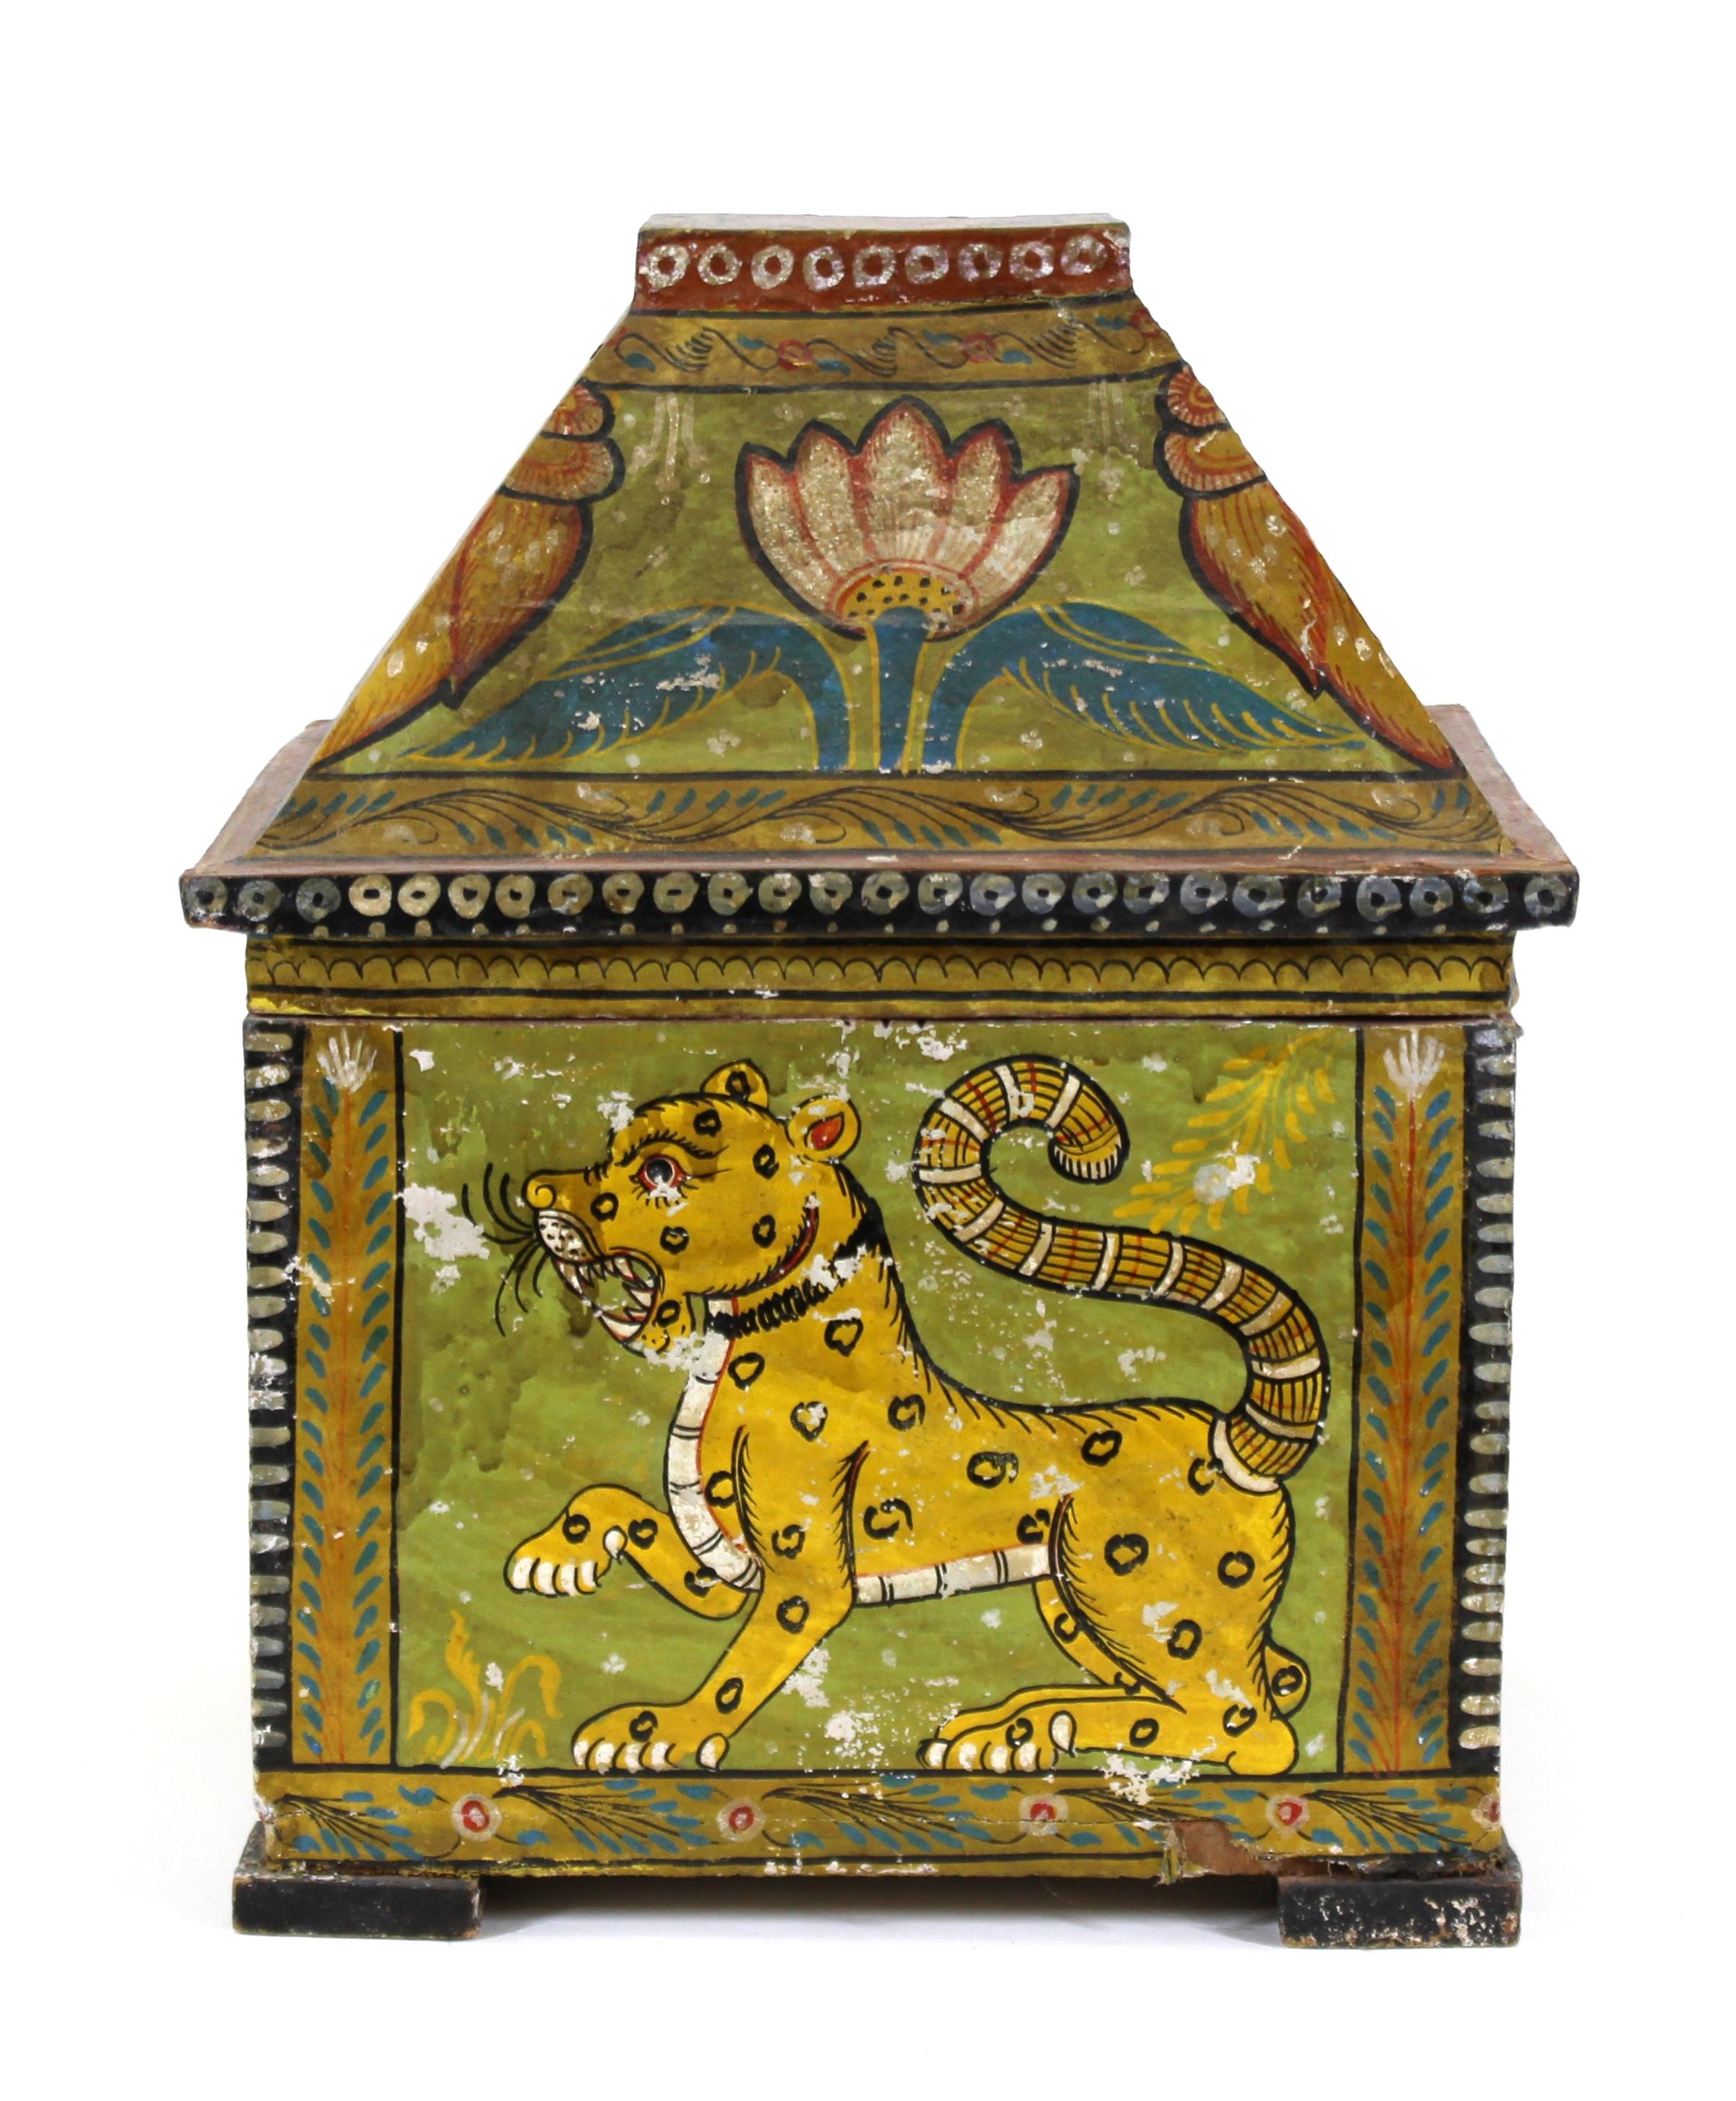 Hand-Painted Indian Wood Box with Painted Animal Scenes